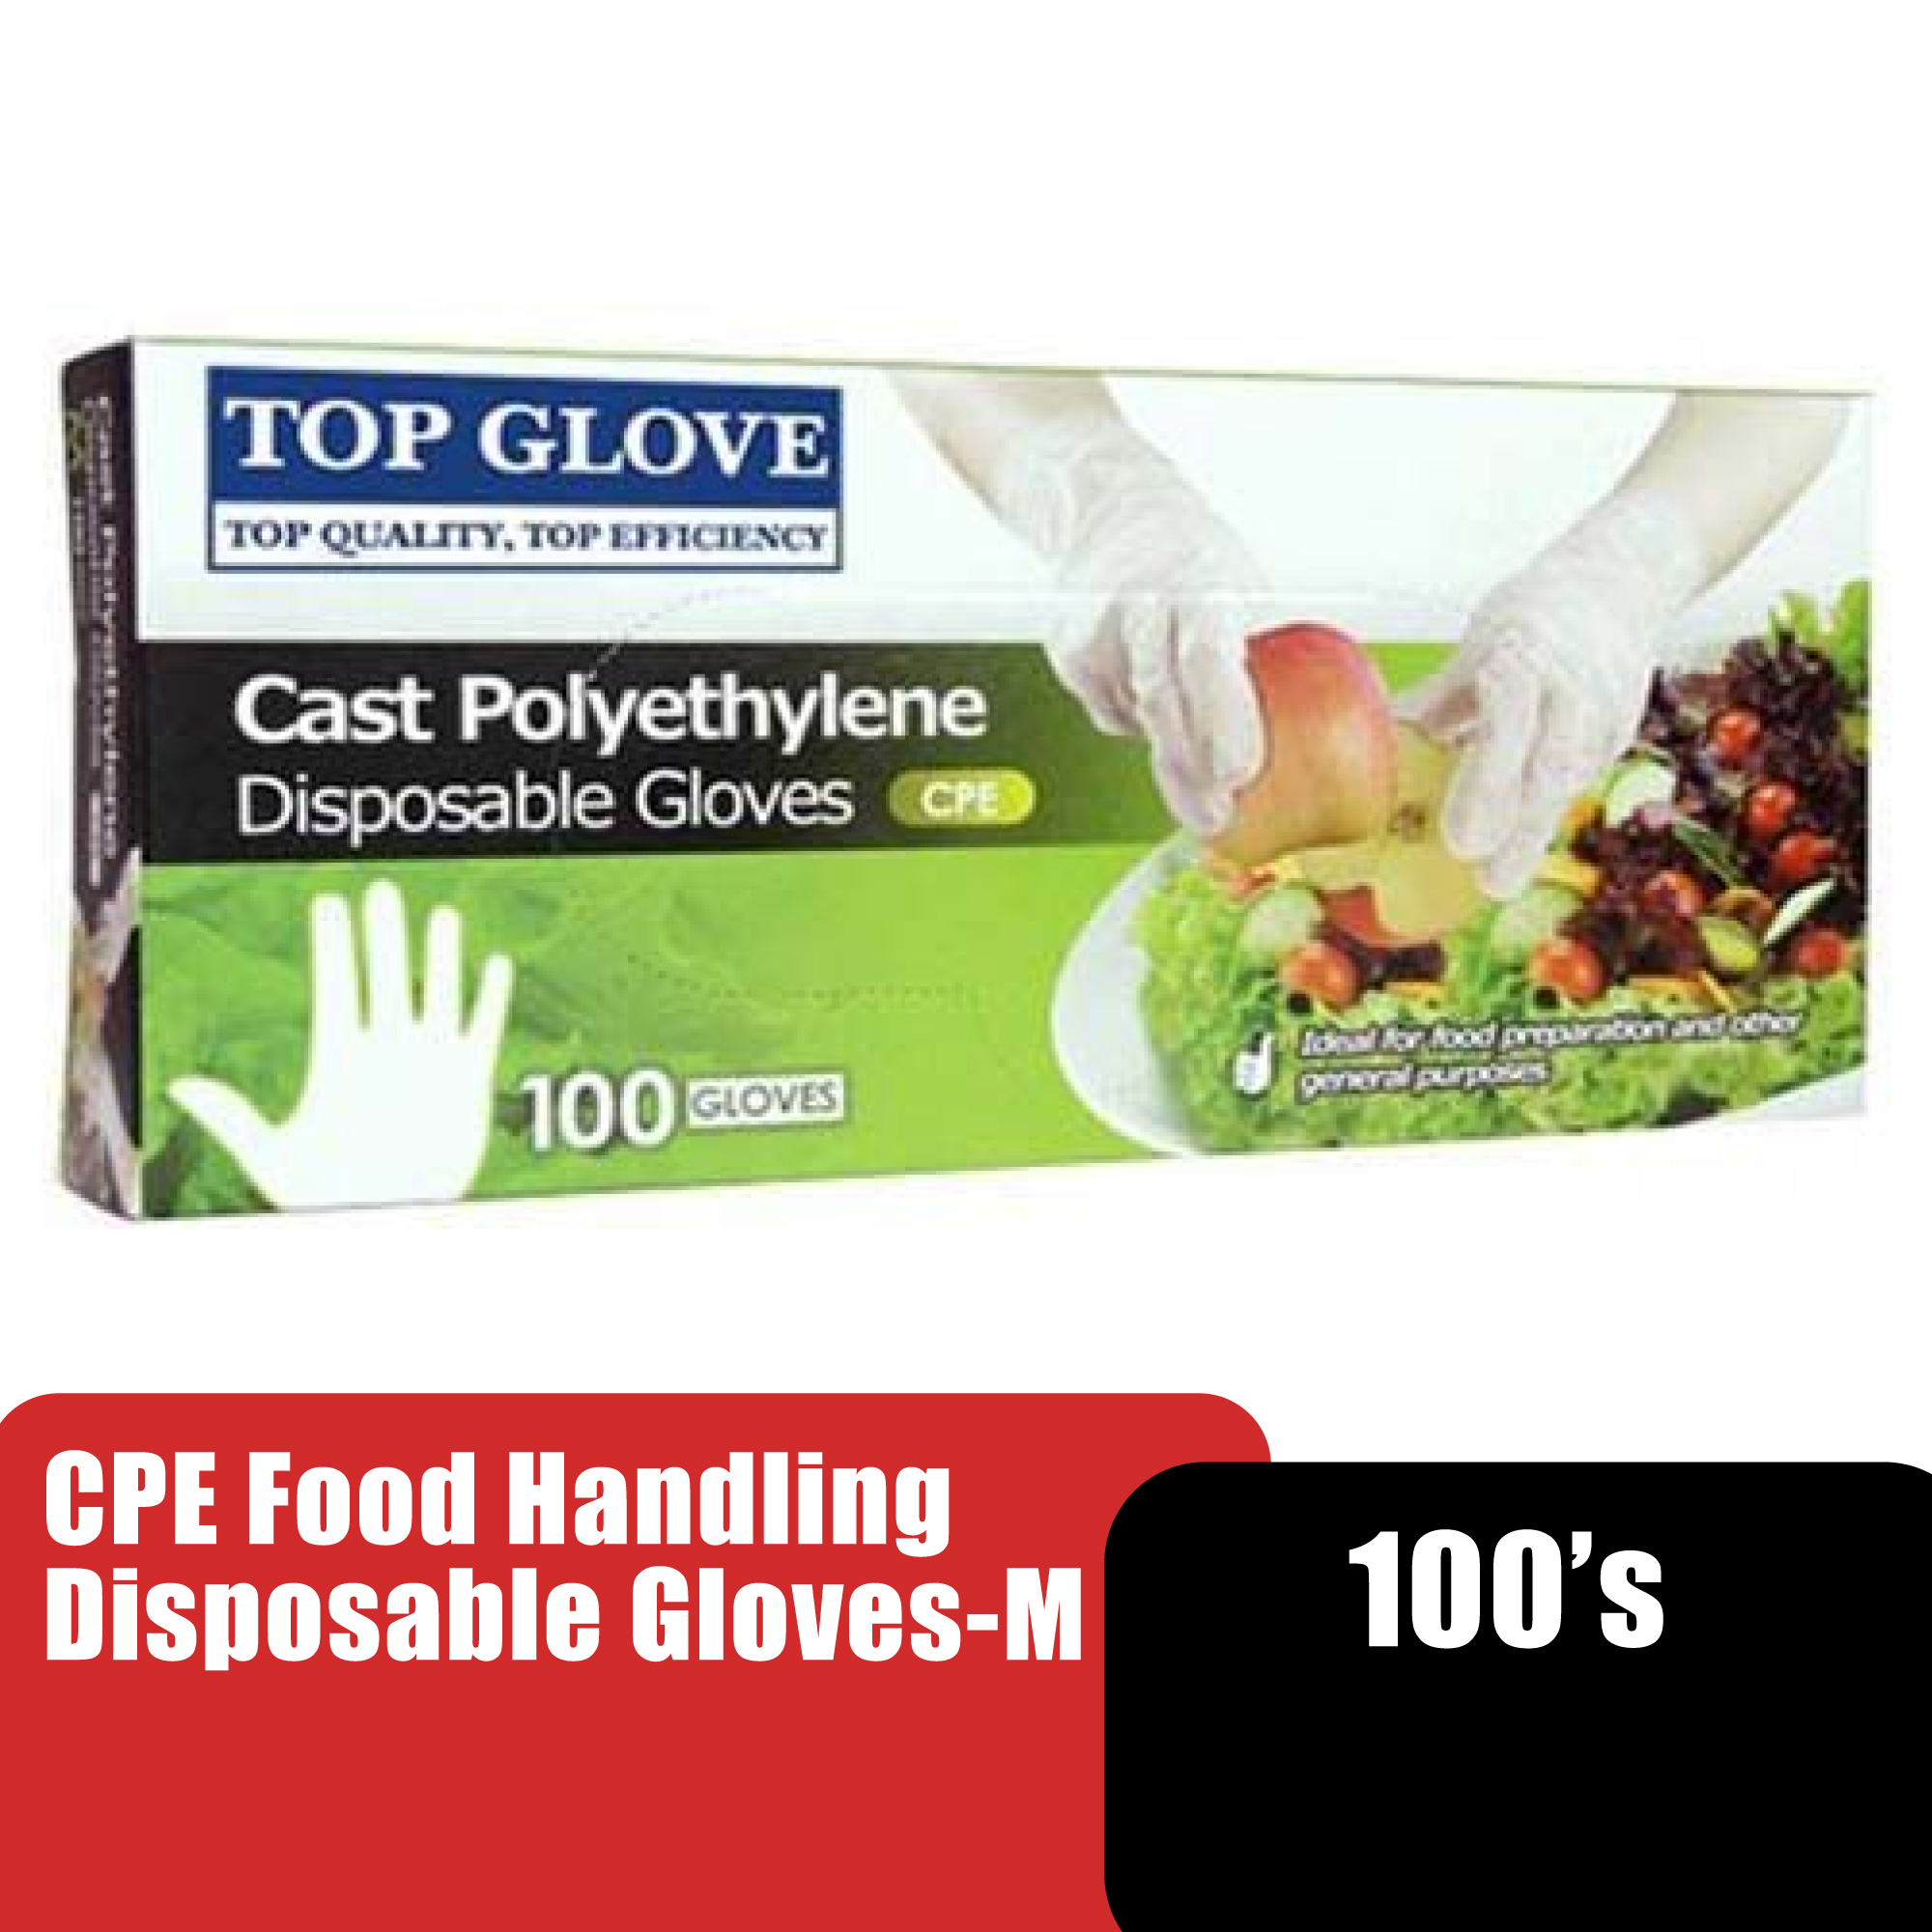 TOP GLOVE CPE FOOD HANDLING DISPOSABLE GLOVES (CLEAR) 100'S - M